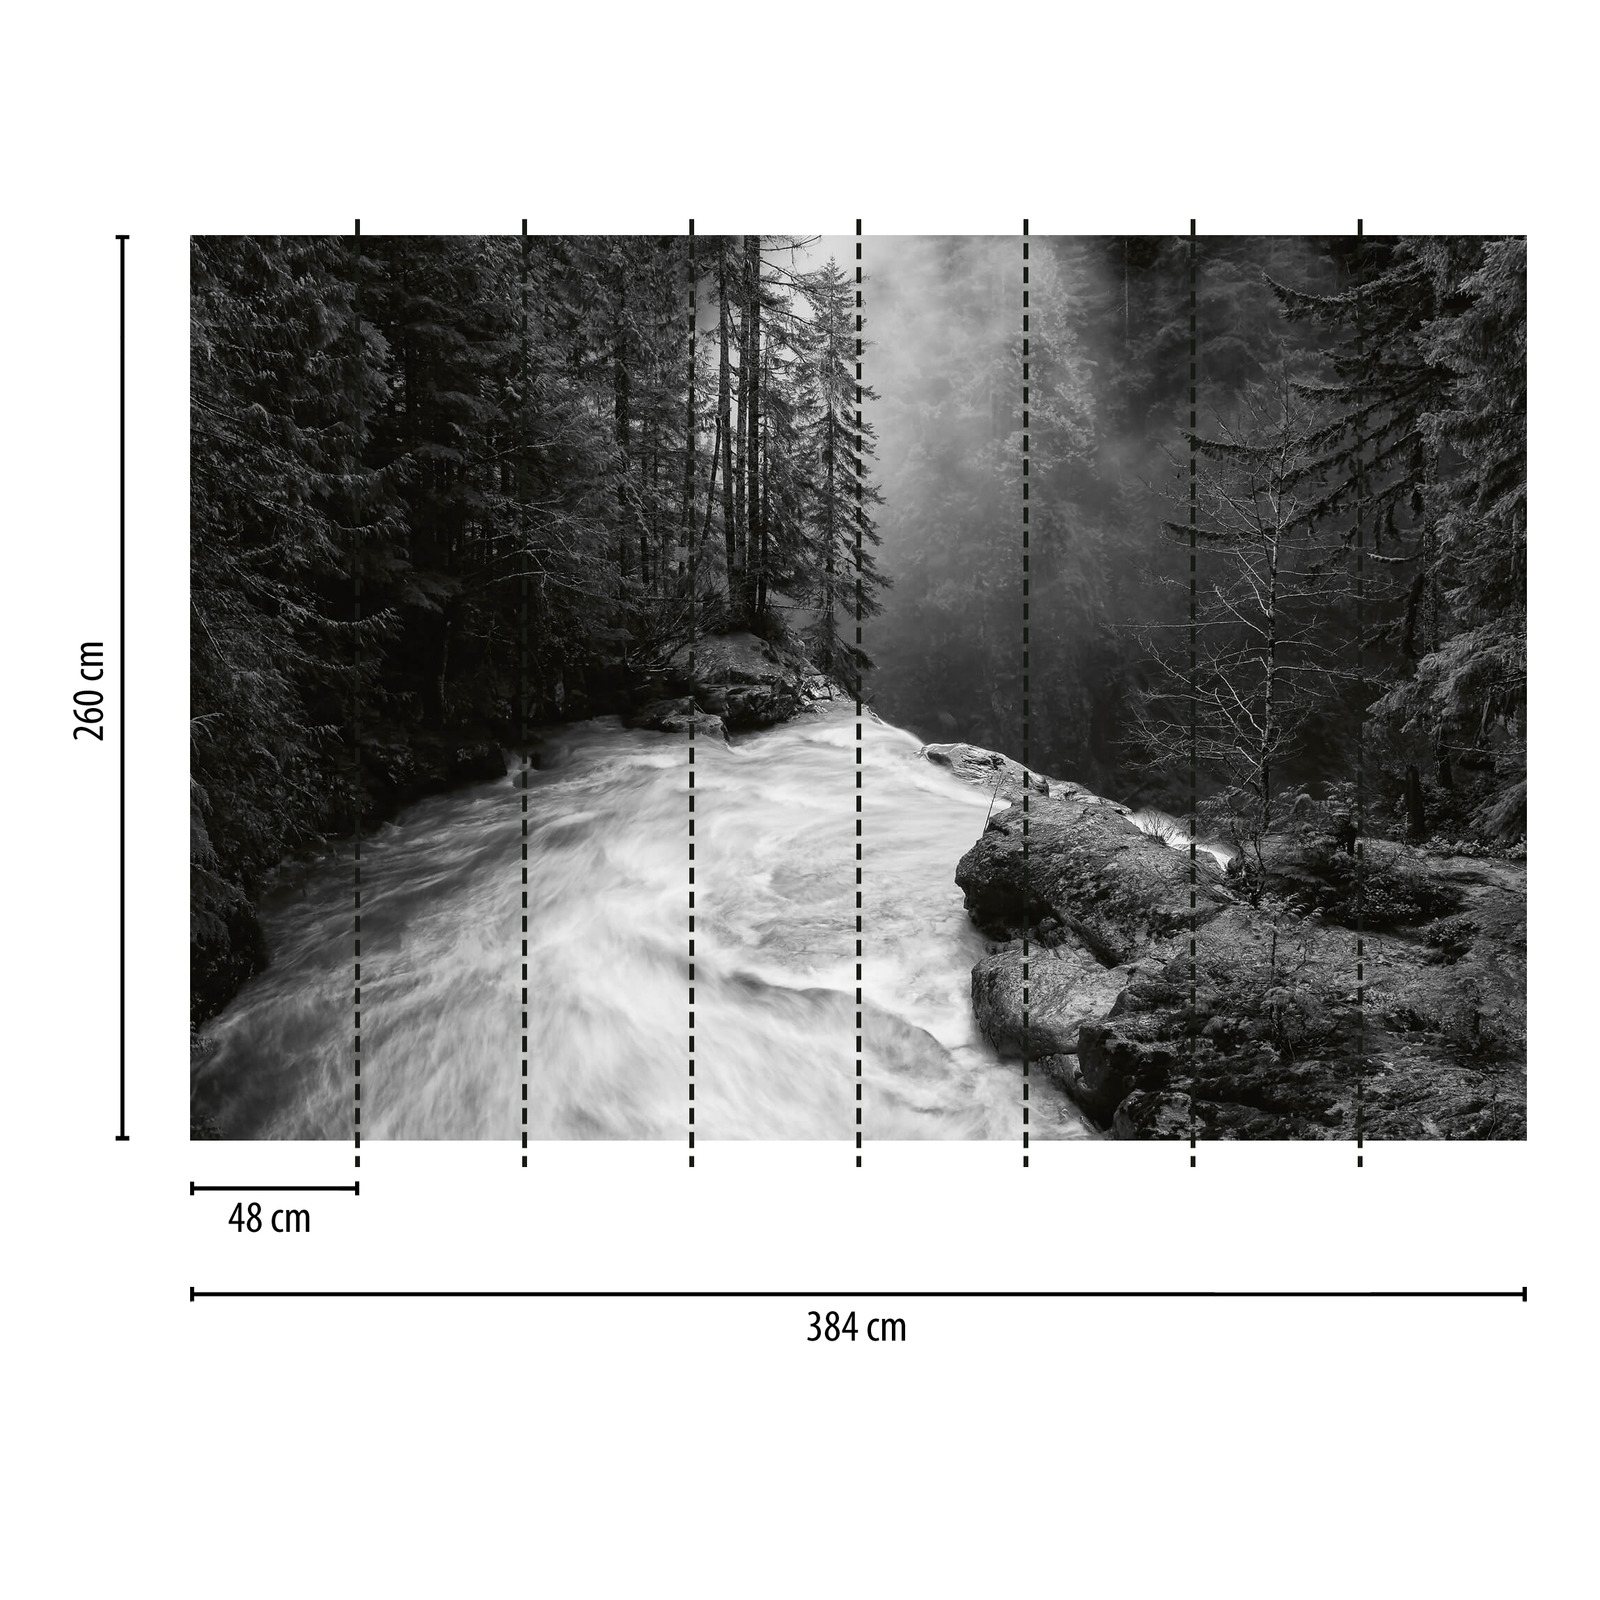             Photo wallpaper forest with waterfall - black, white, grey
        